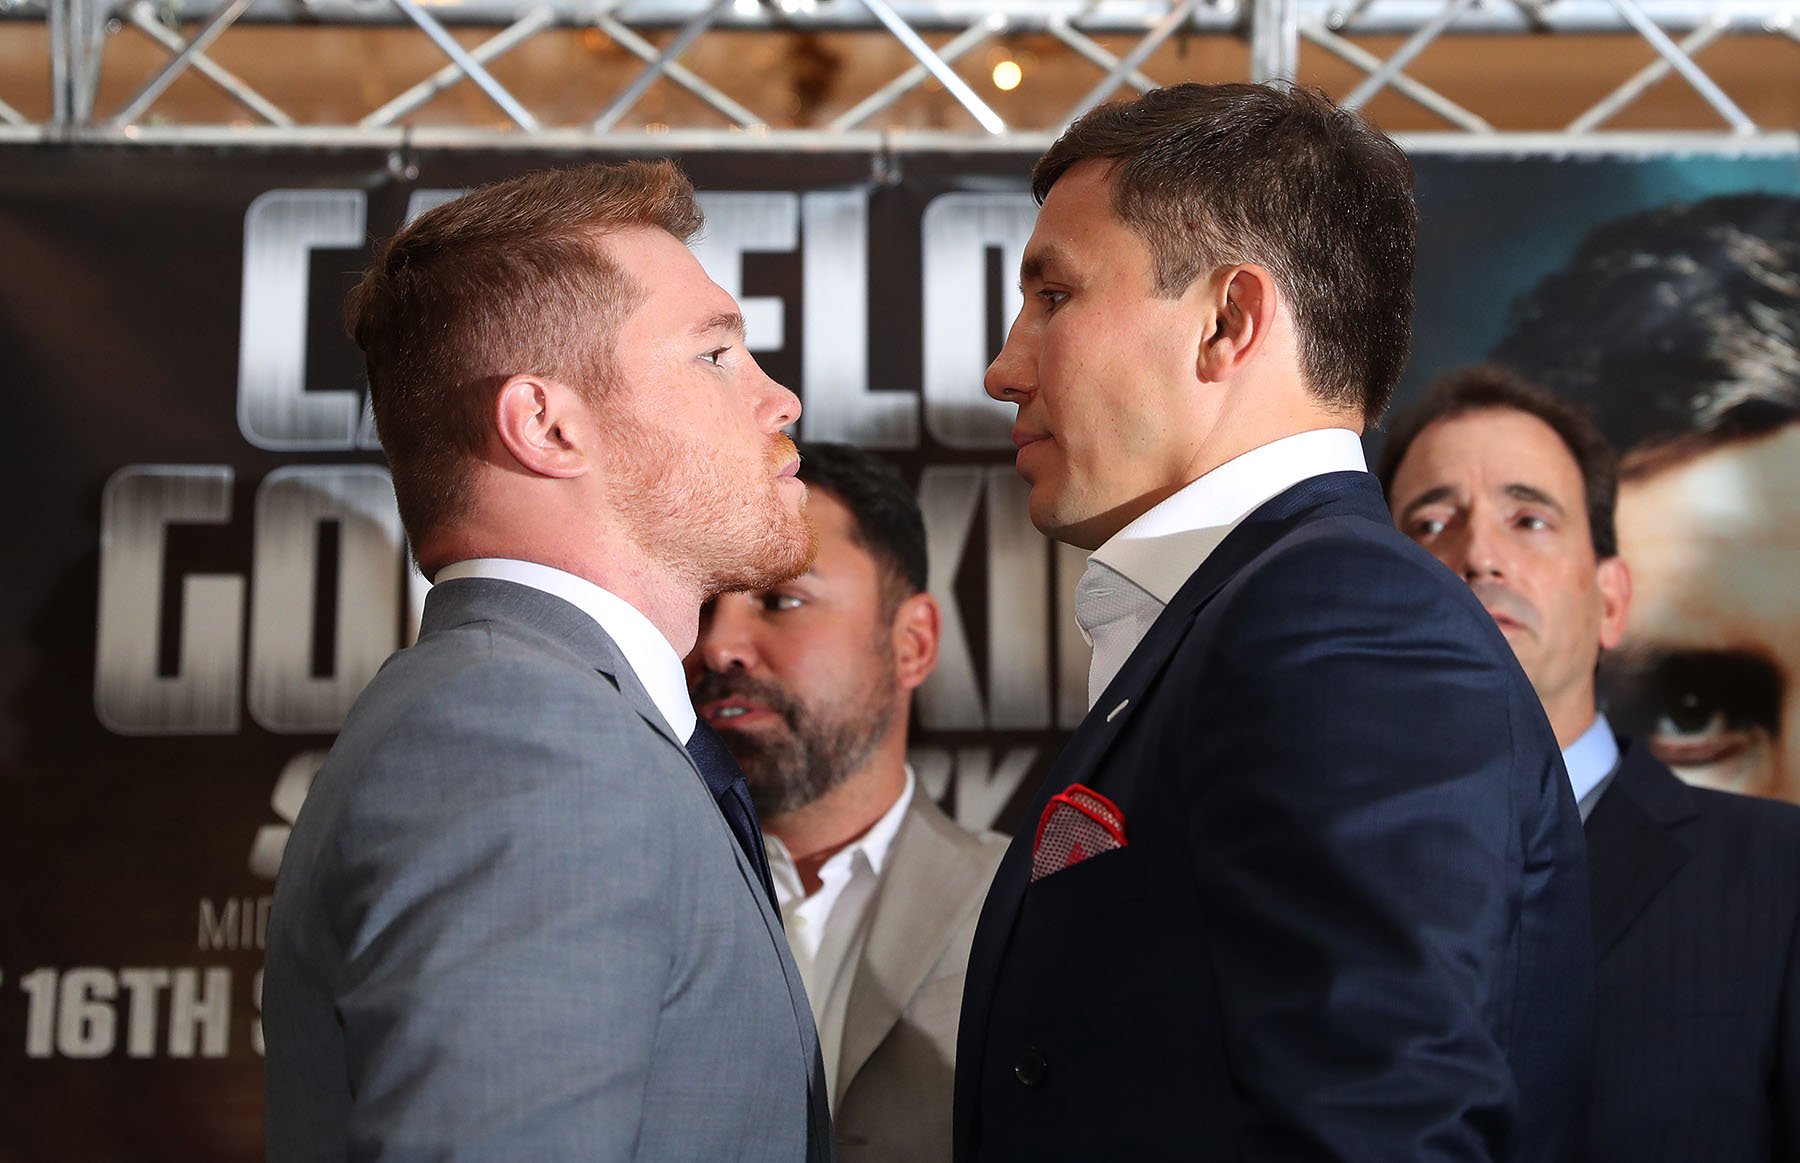 Jesus Cova’s view: Canelo and GGG will prove who’s the best